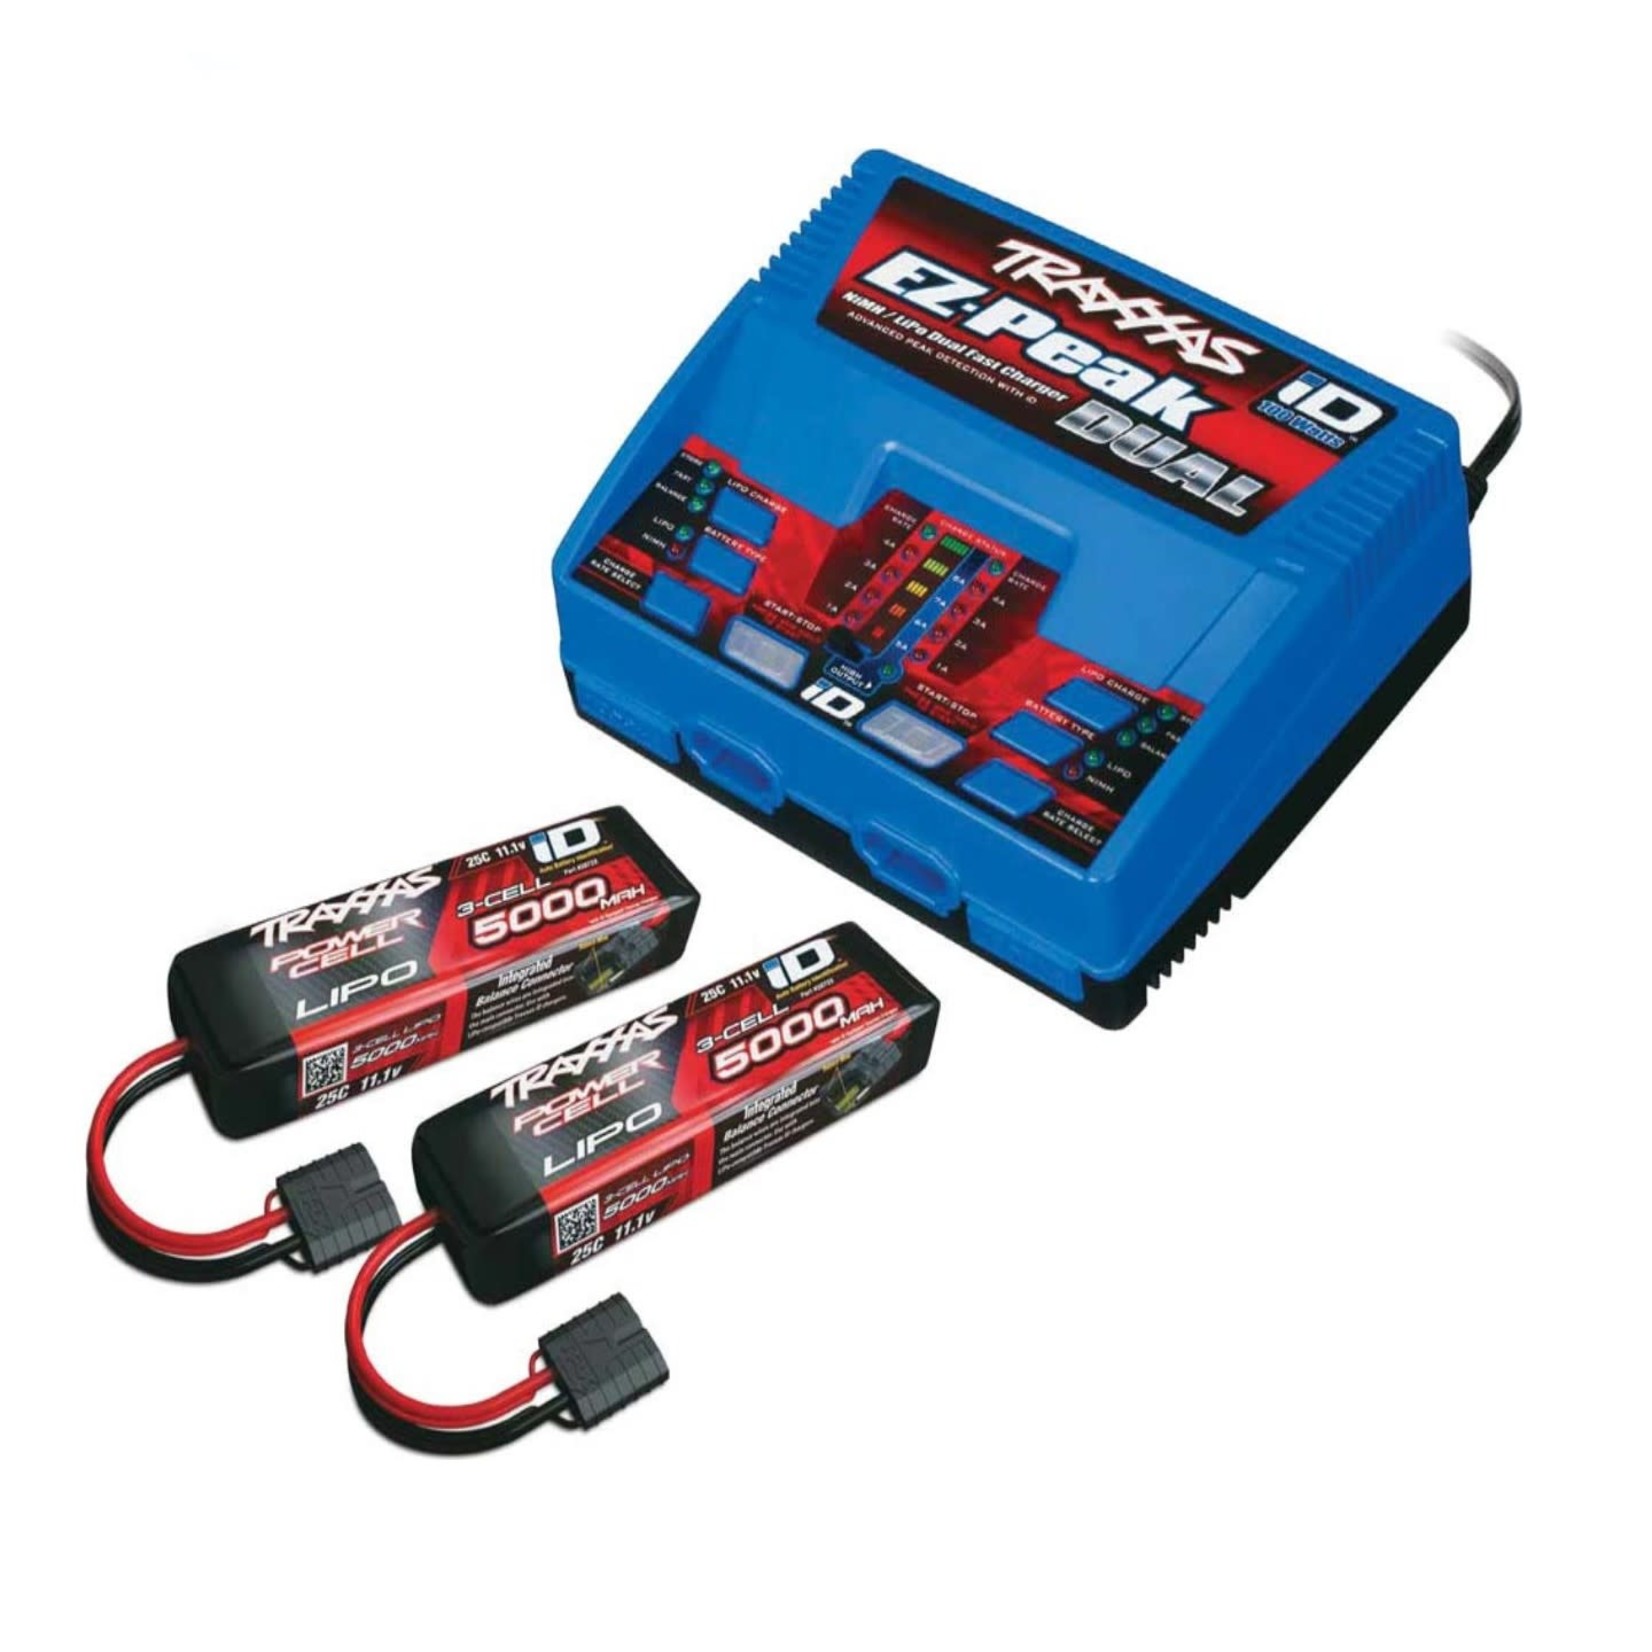 Traxxas EZ-Peak Dual 3S Completer Pack with 2x 5000mAh LiPo